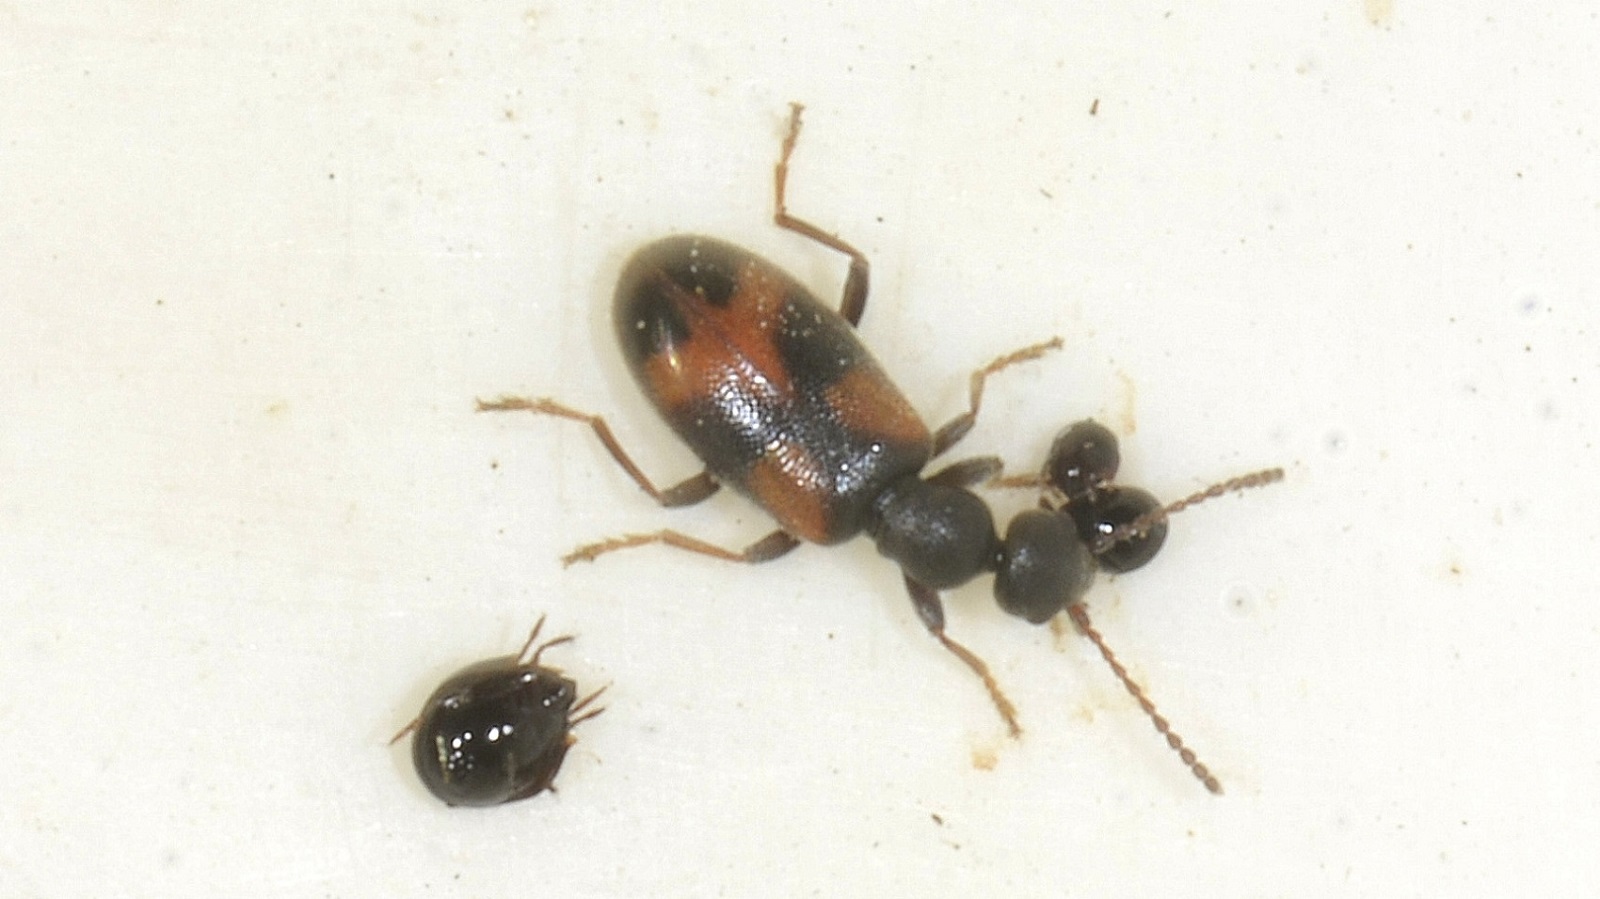 Anthicidae: Anthicus antherinus o A. invreai